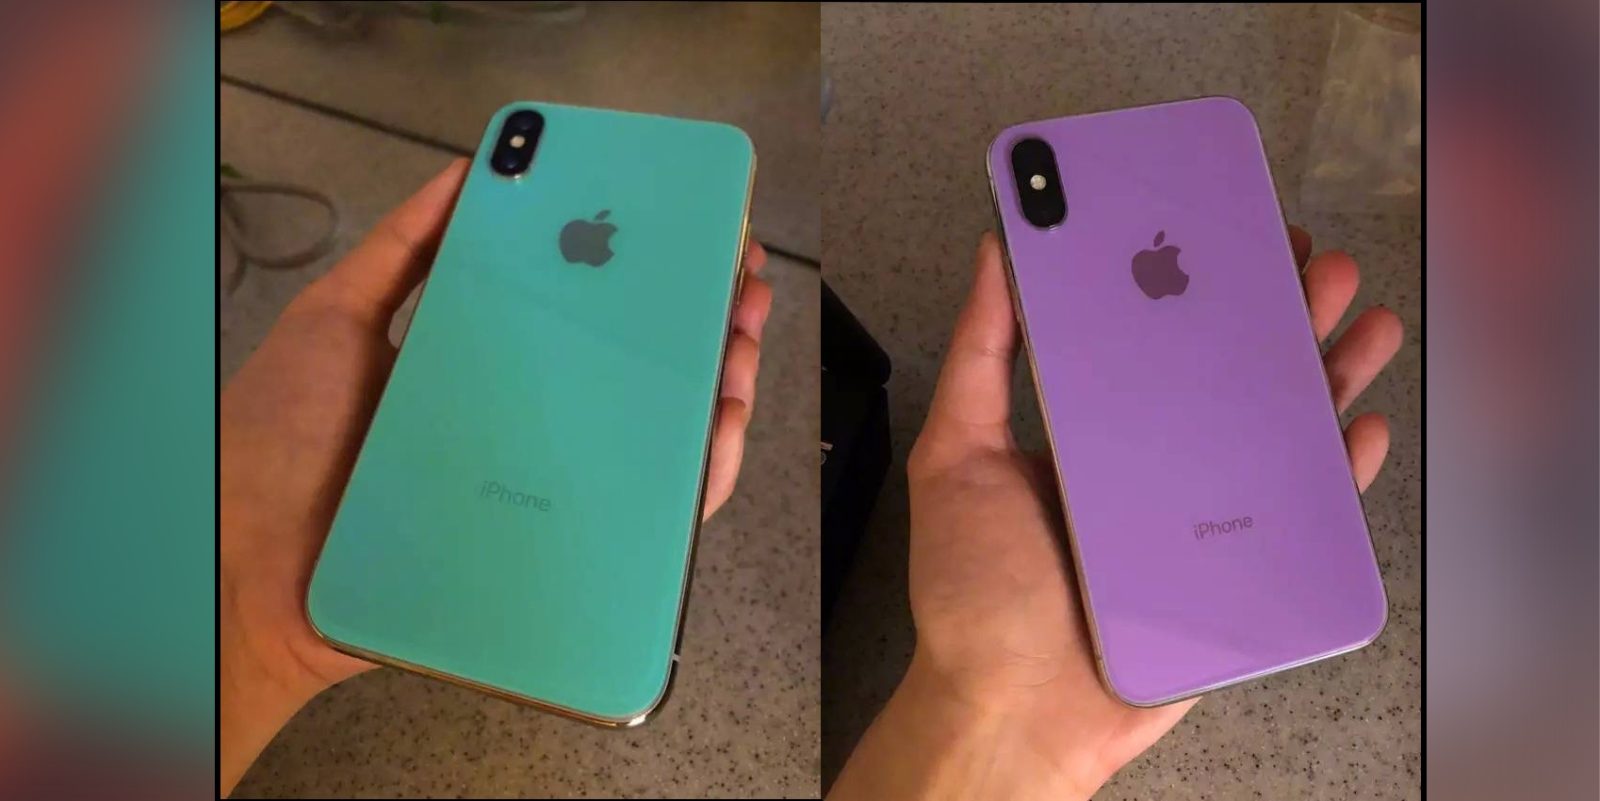 Sketchy photos show purported 2018 iPhone X 'prototype' in new ...